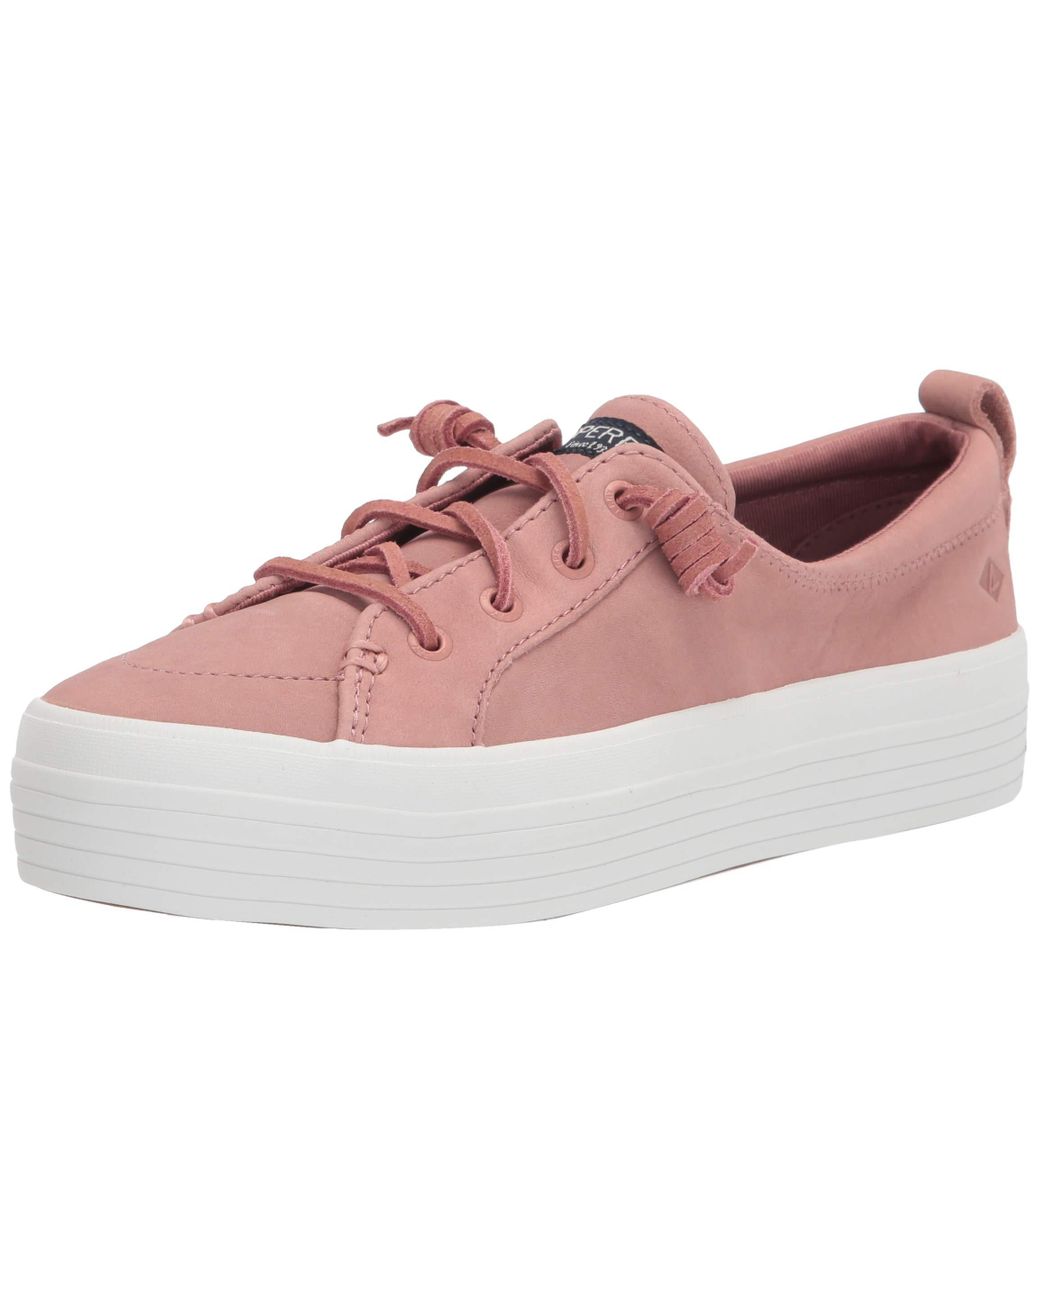 Sperry Top-Sider Rubber Crest Vibe Platform Sneaker in Dusty Rose (Pink ...